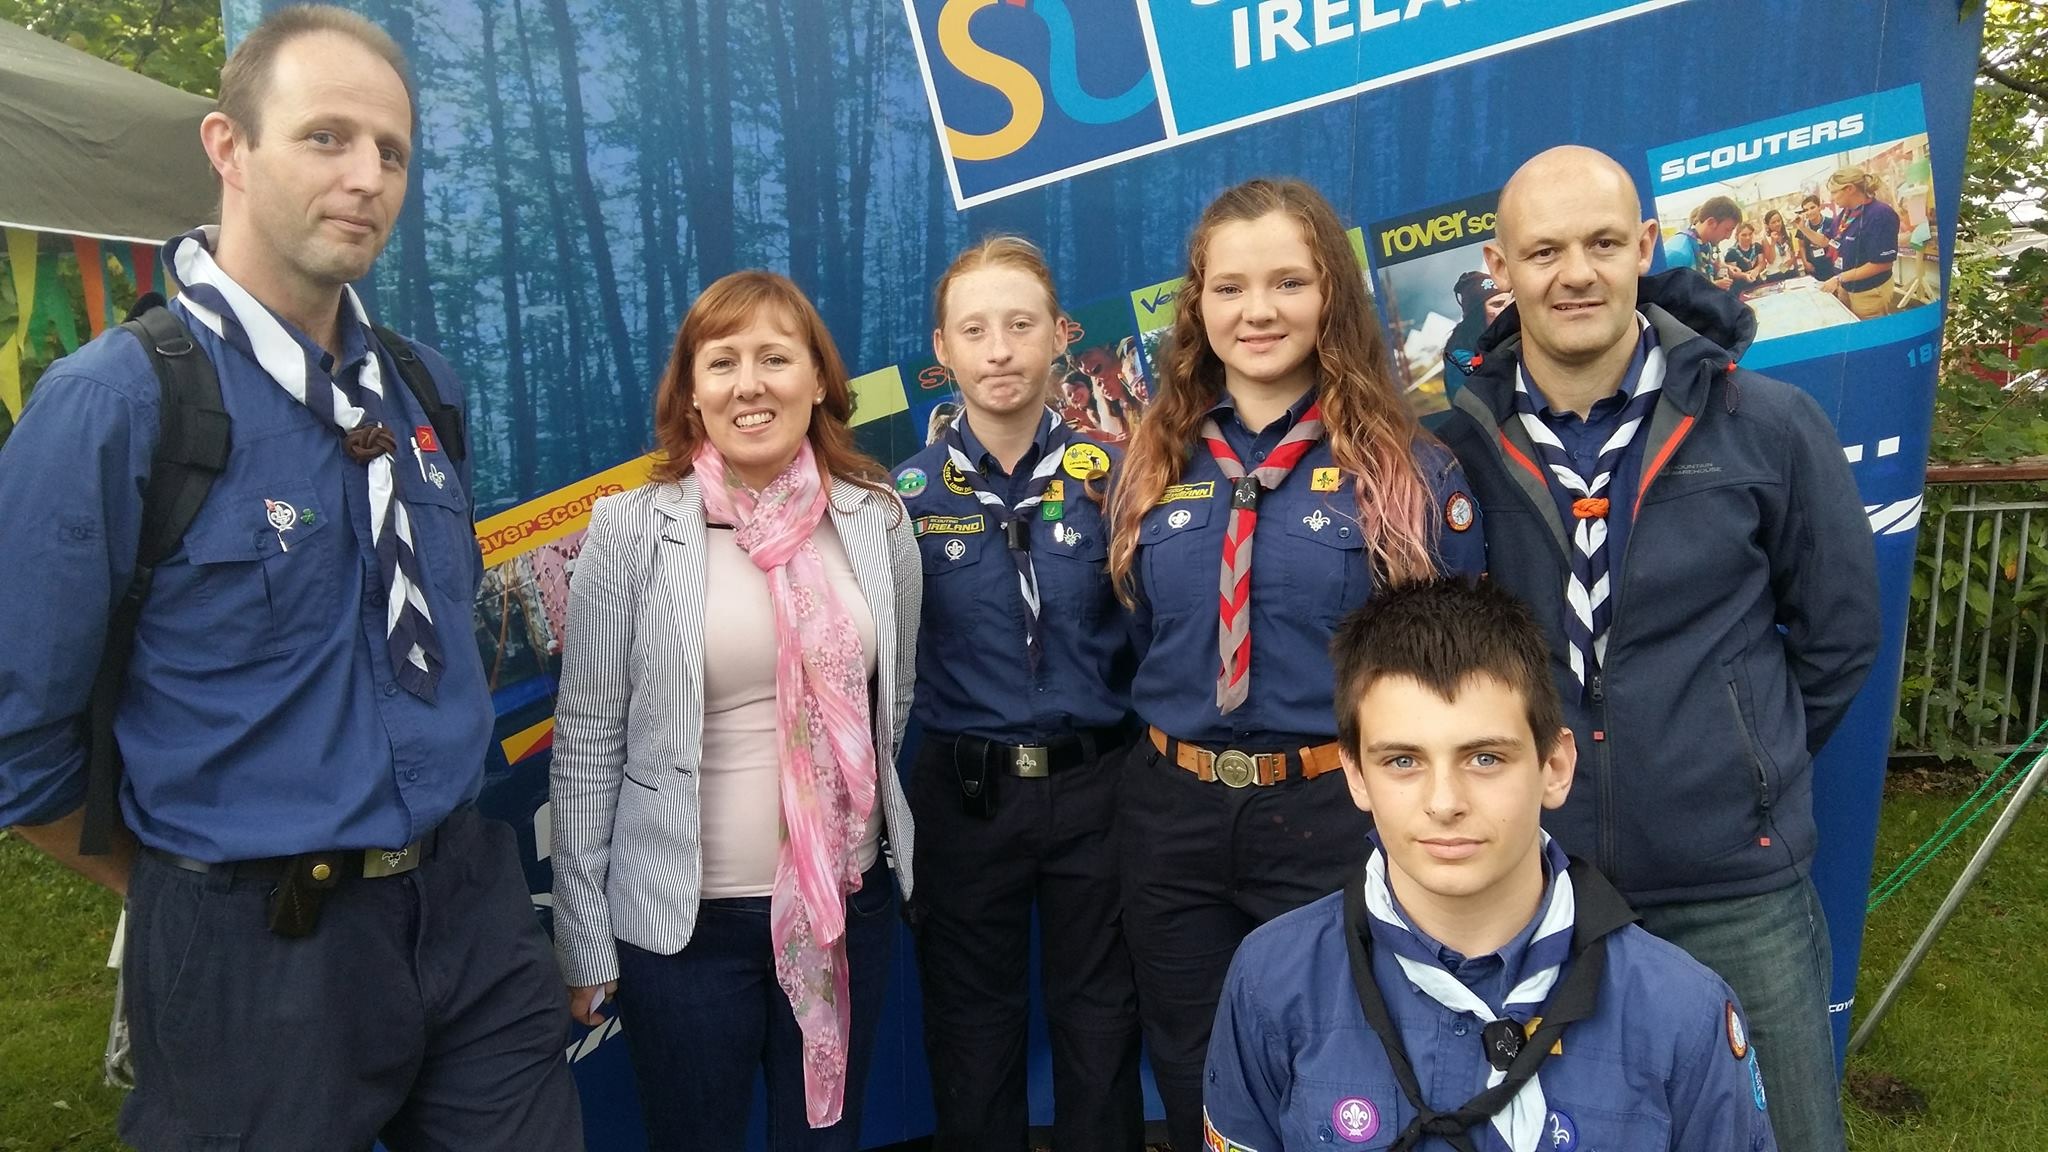 Cllr. Liona O'Toole with Lucan Scout Troop at Lucan Festival